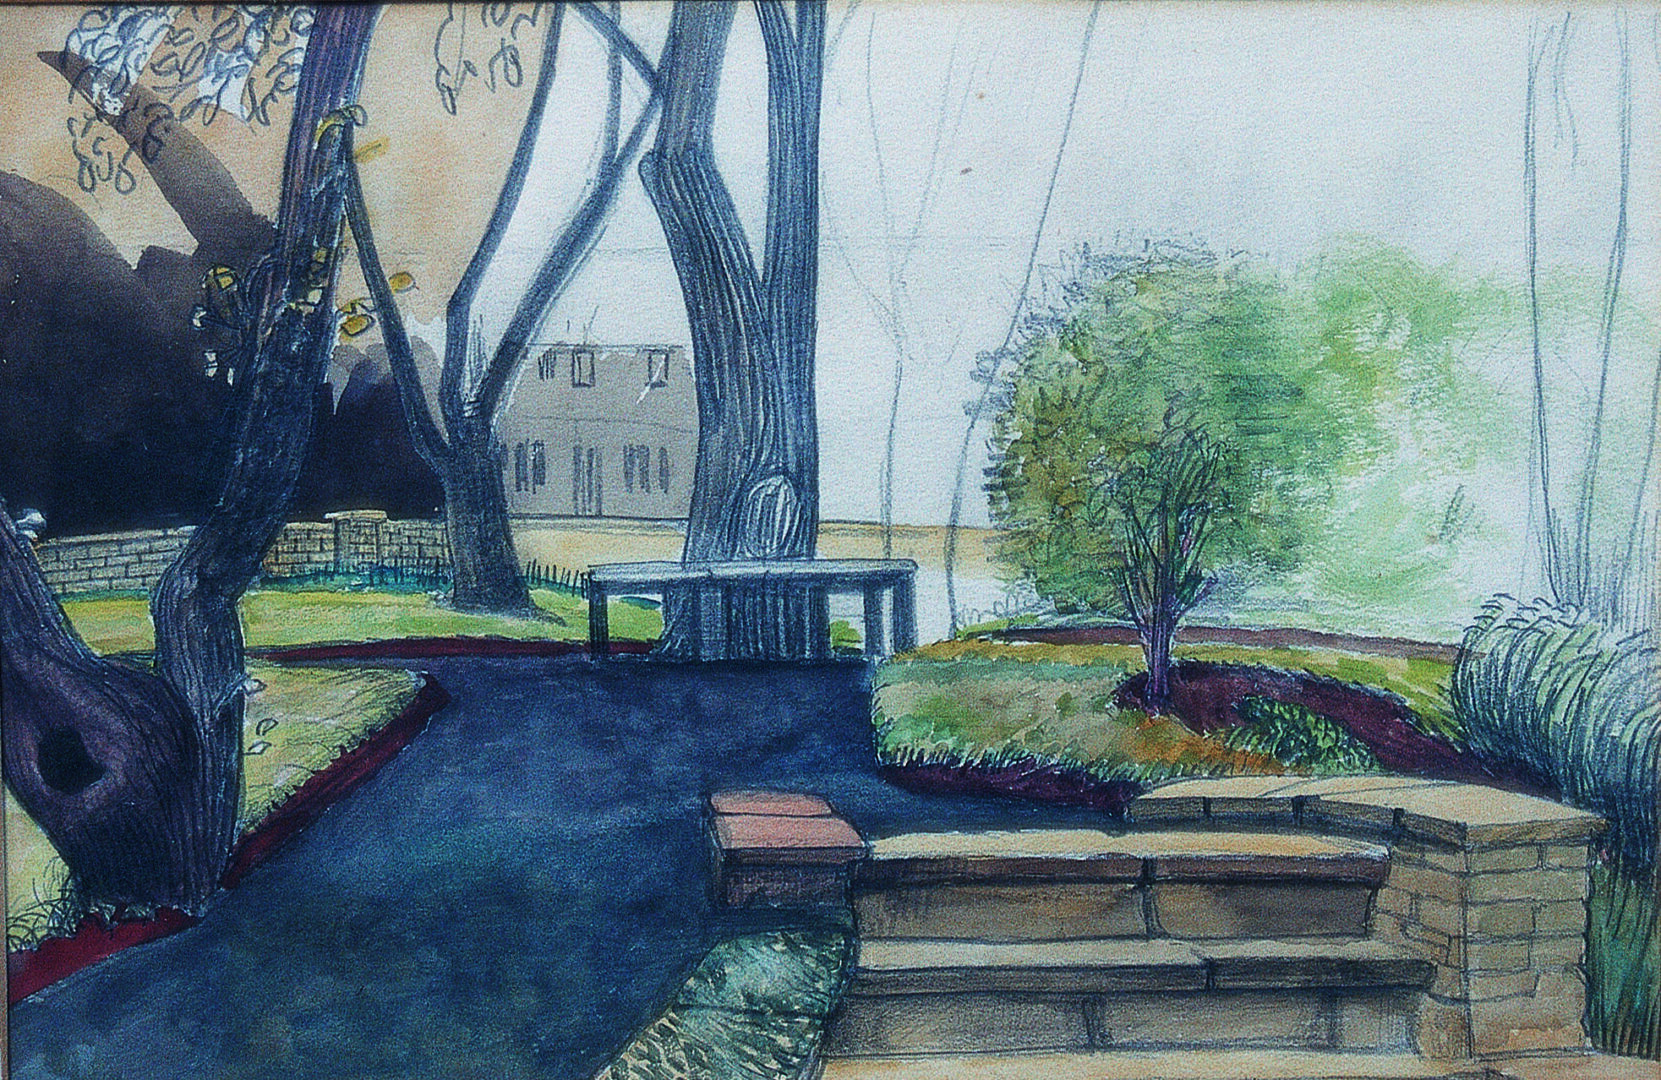 Garden scene with trees and benches